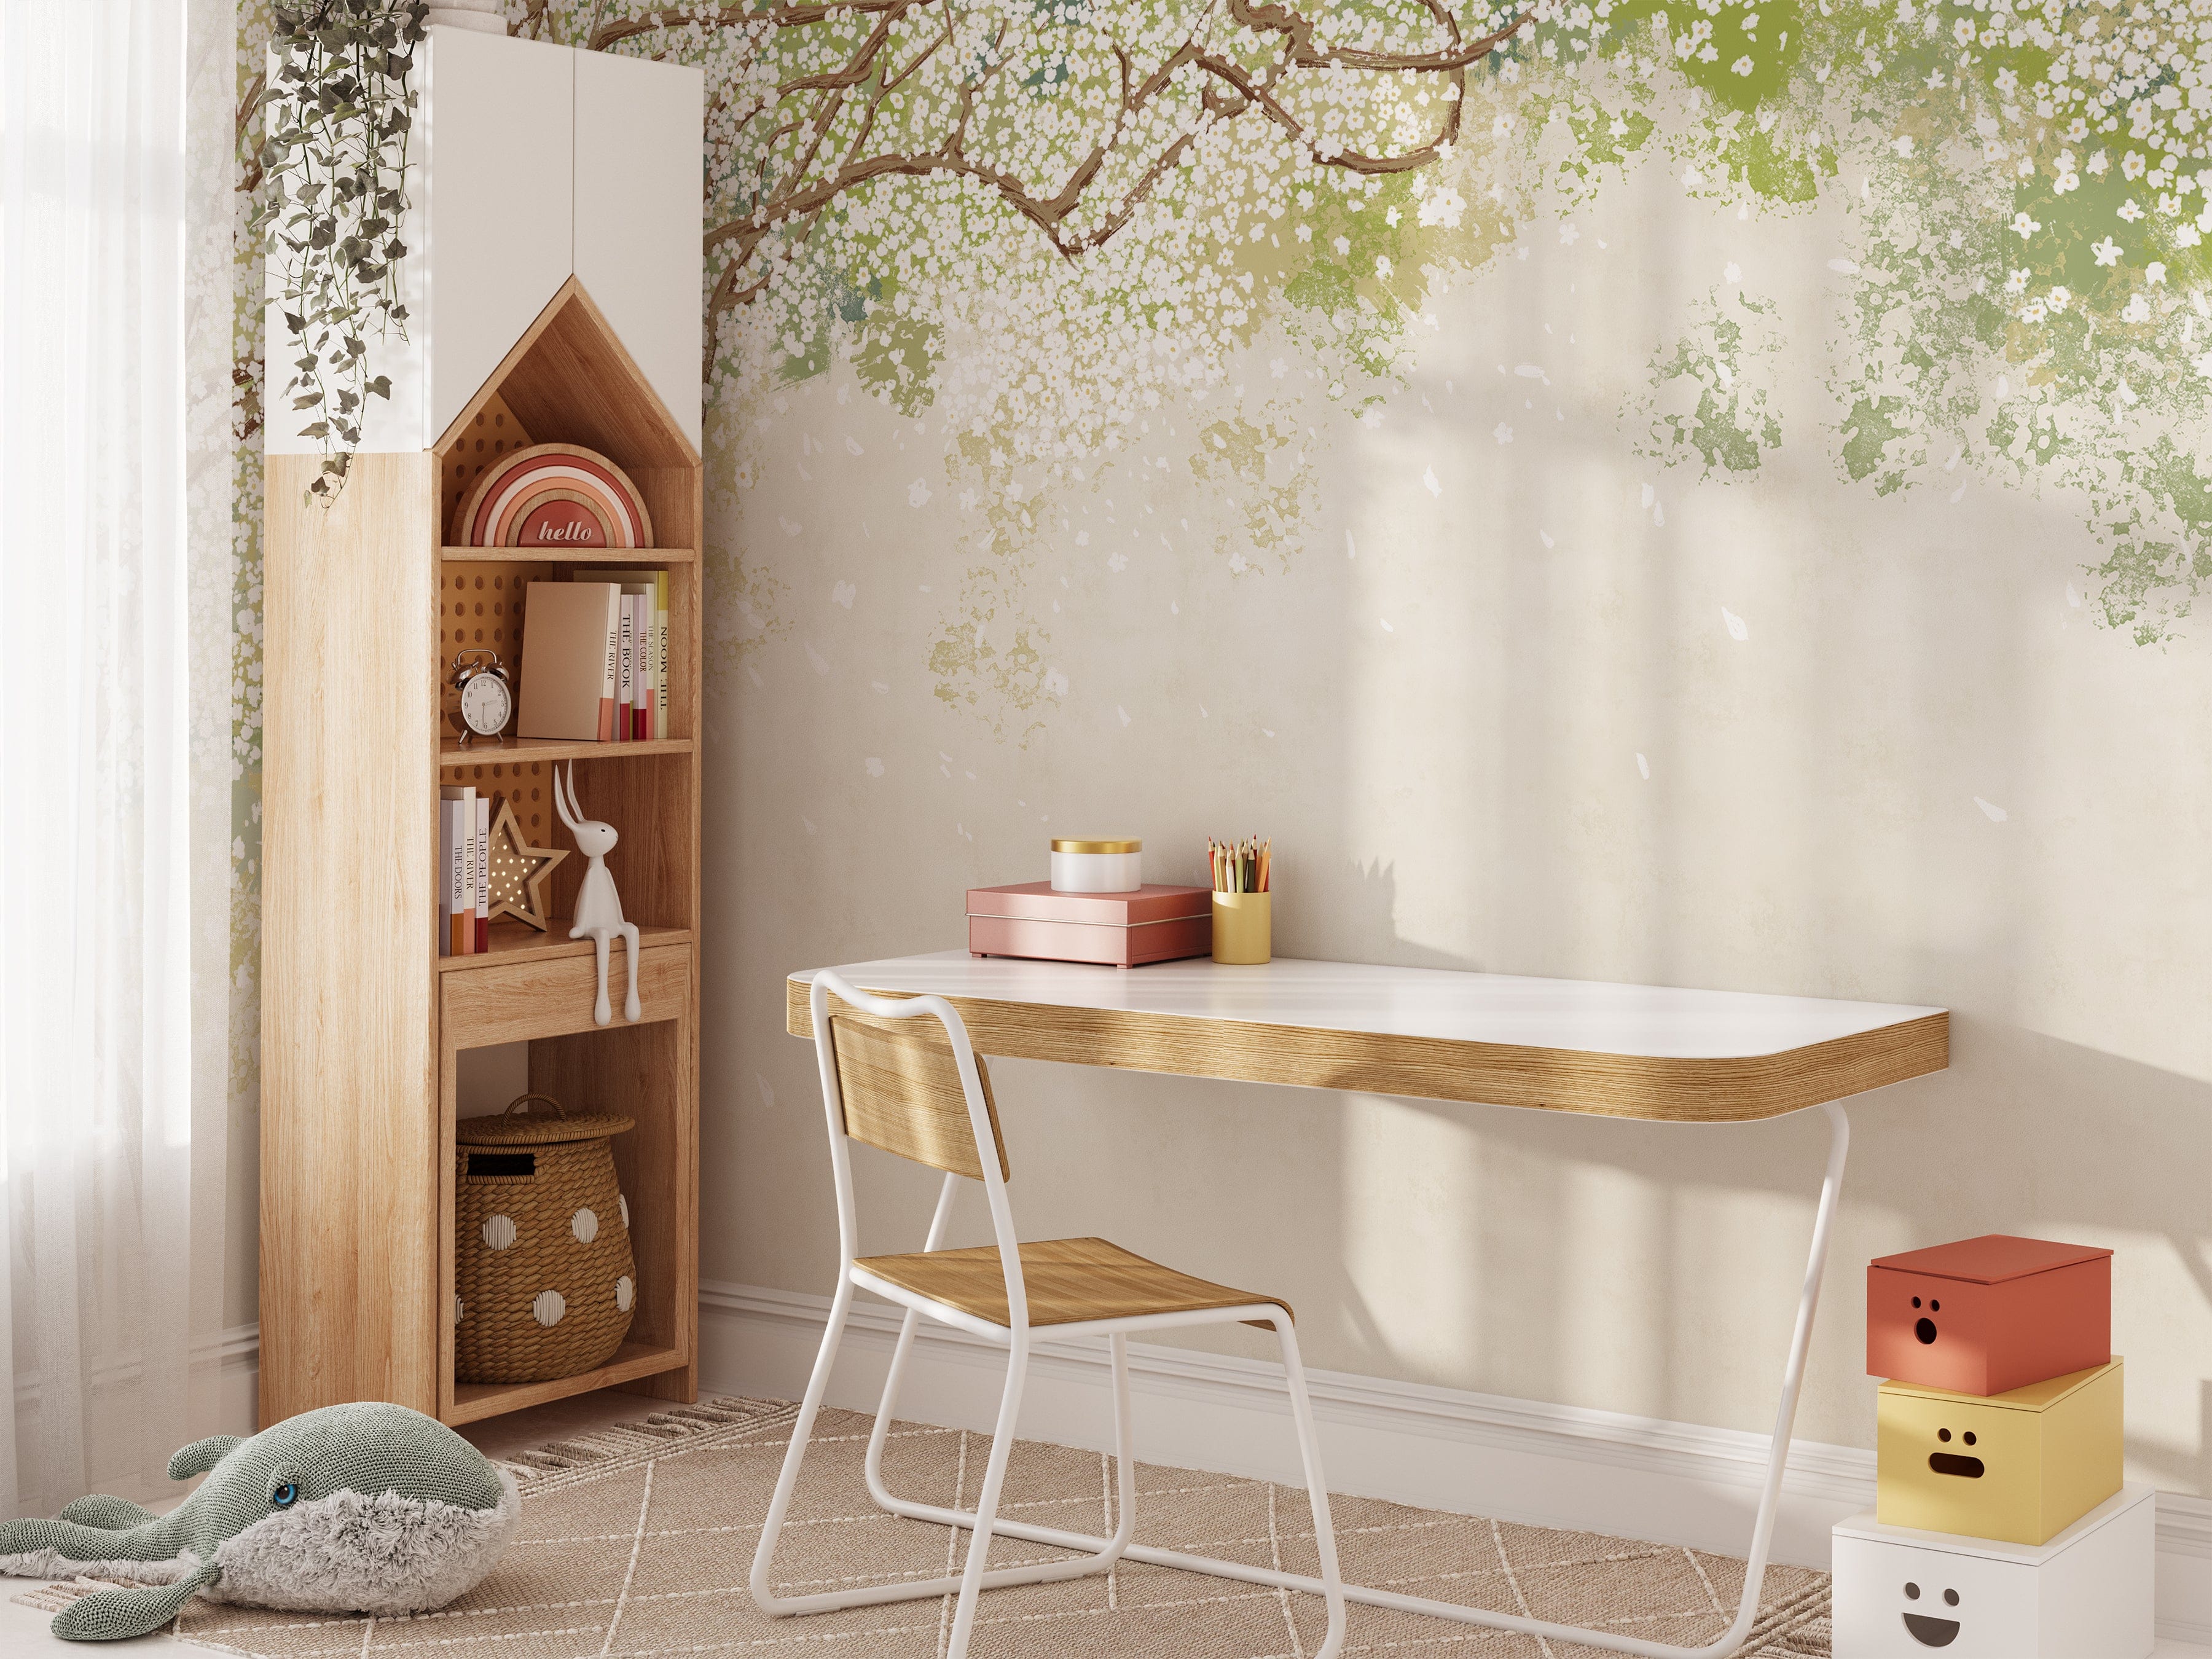 A well-organized study nook with a wooden desk, chair, and a tall bookshelf against a wall featuring the Sakura Serenade mural wallpaper. The wallpaper's design of cherry blossom branches with white flowers on a soft green and beige background adds a serene and elegant ambiance to the space.